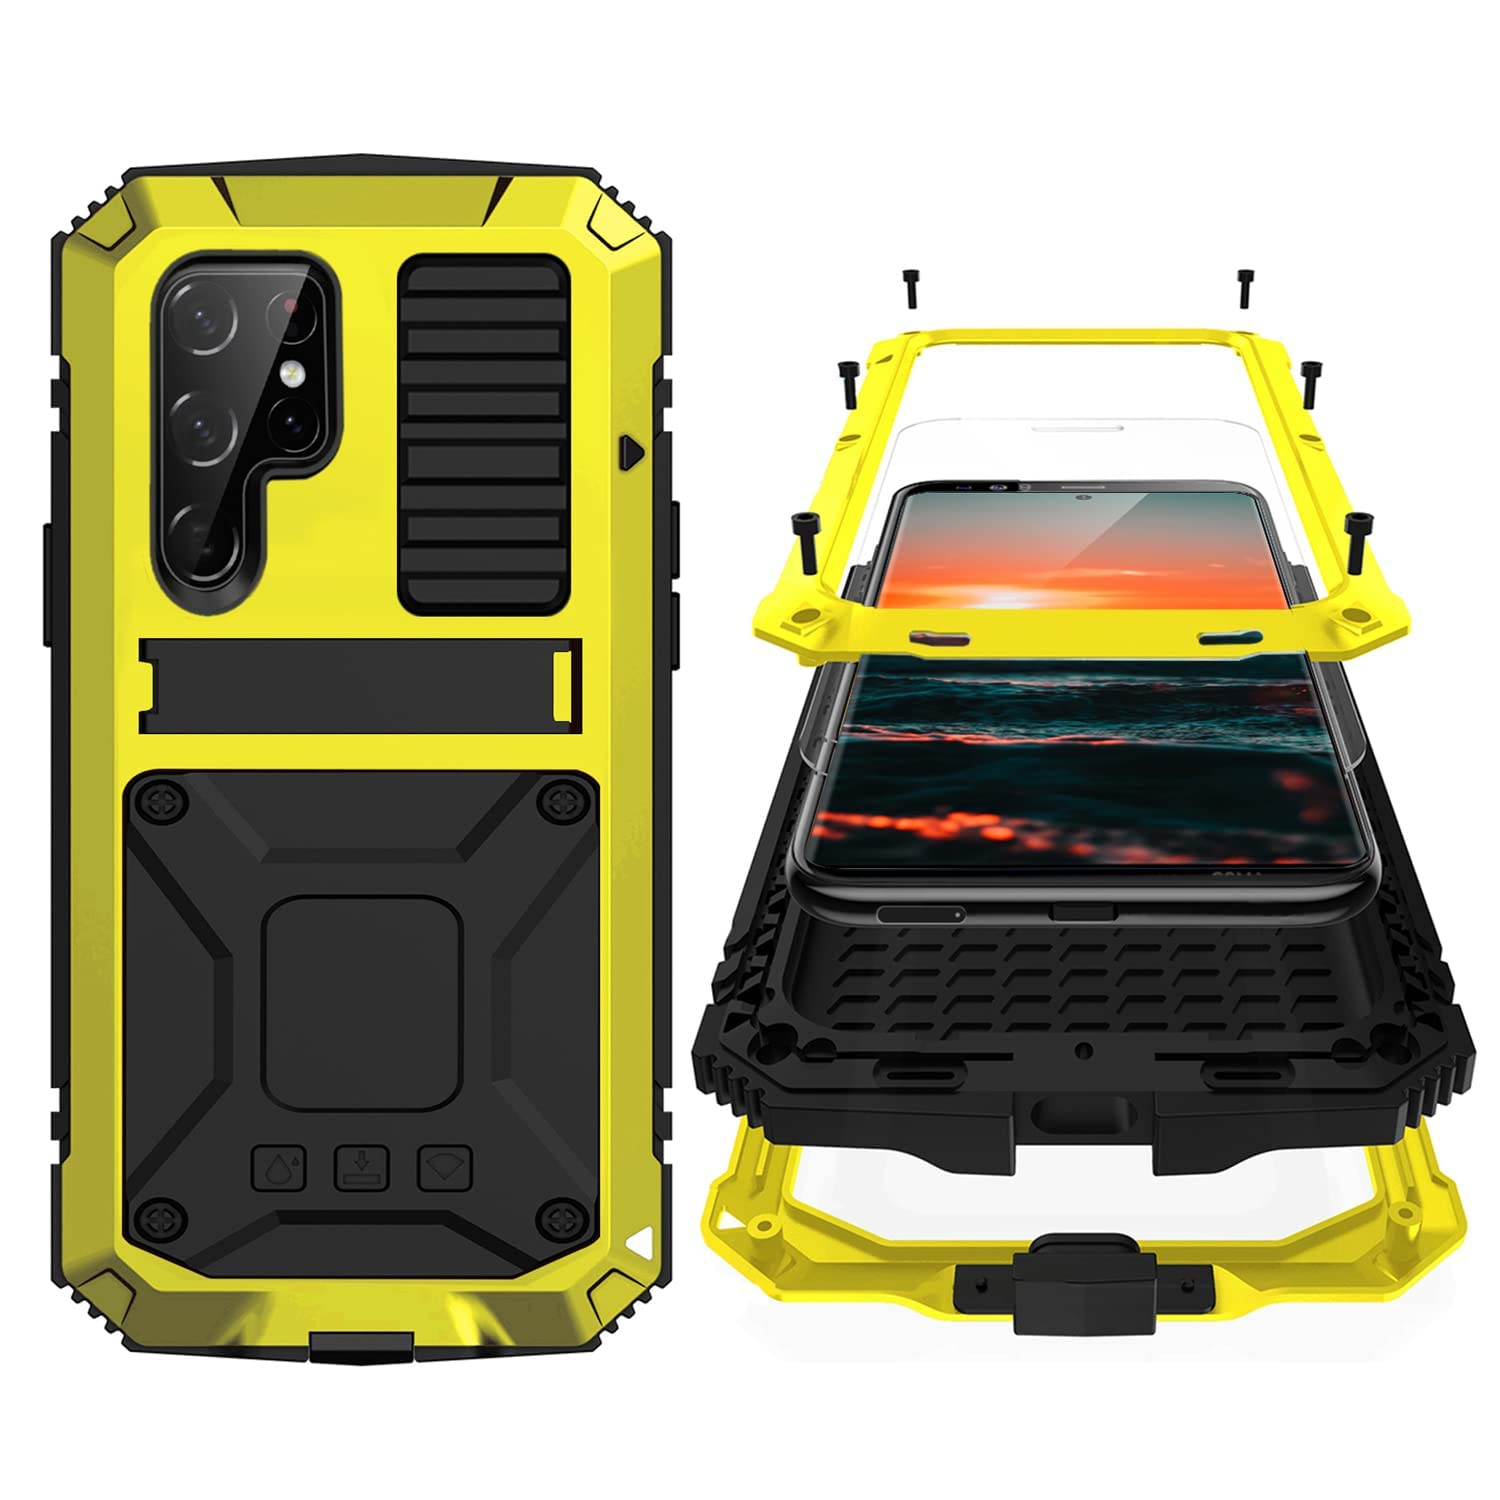 Simicoo Samsung S22 Plus Metal Bumper Silicone Case with Stand Hybrid Military Shockproof Heavy Duty Rugged case Built-in Screen Protector Cover for Samsung S22 Plus (S22 Plus, Yellow)